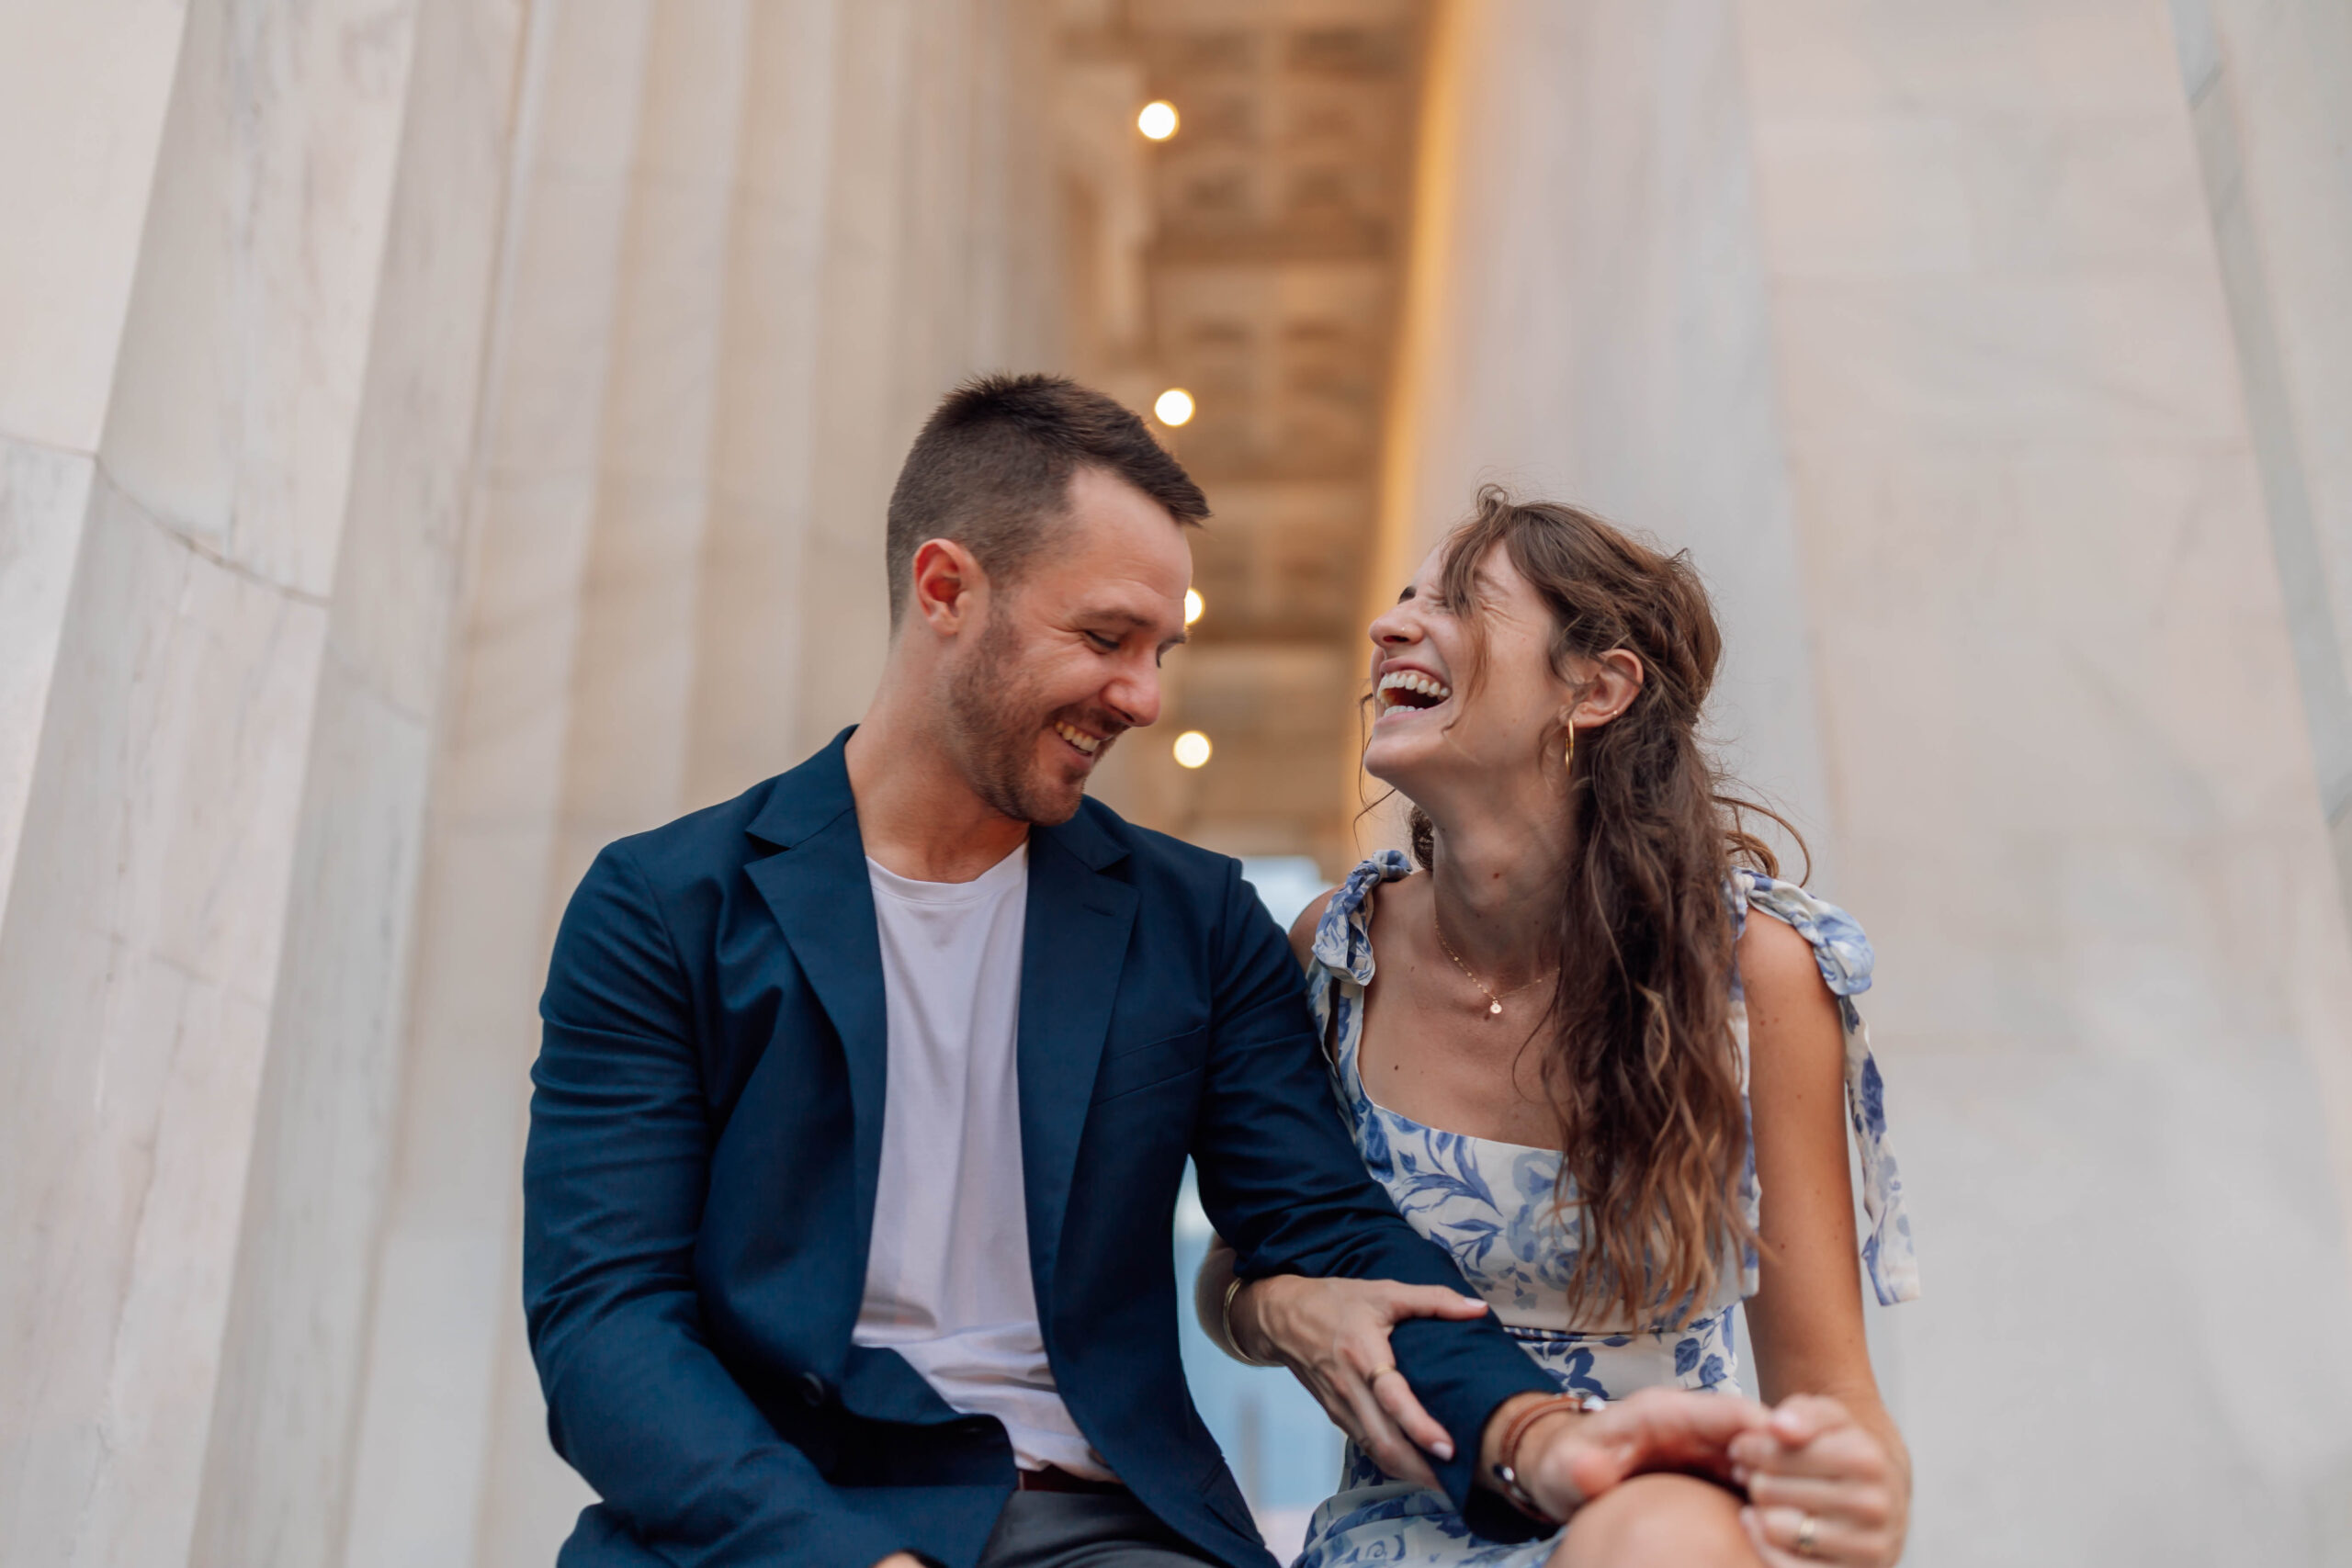 Roman Washington D.C. Engagement Photo Session at The Lincoln Memorial. True to color, cinematic photography